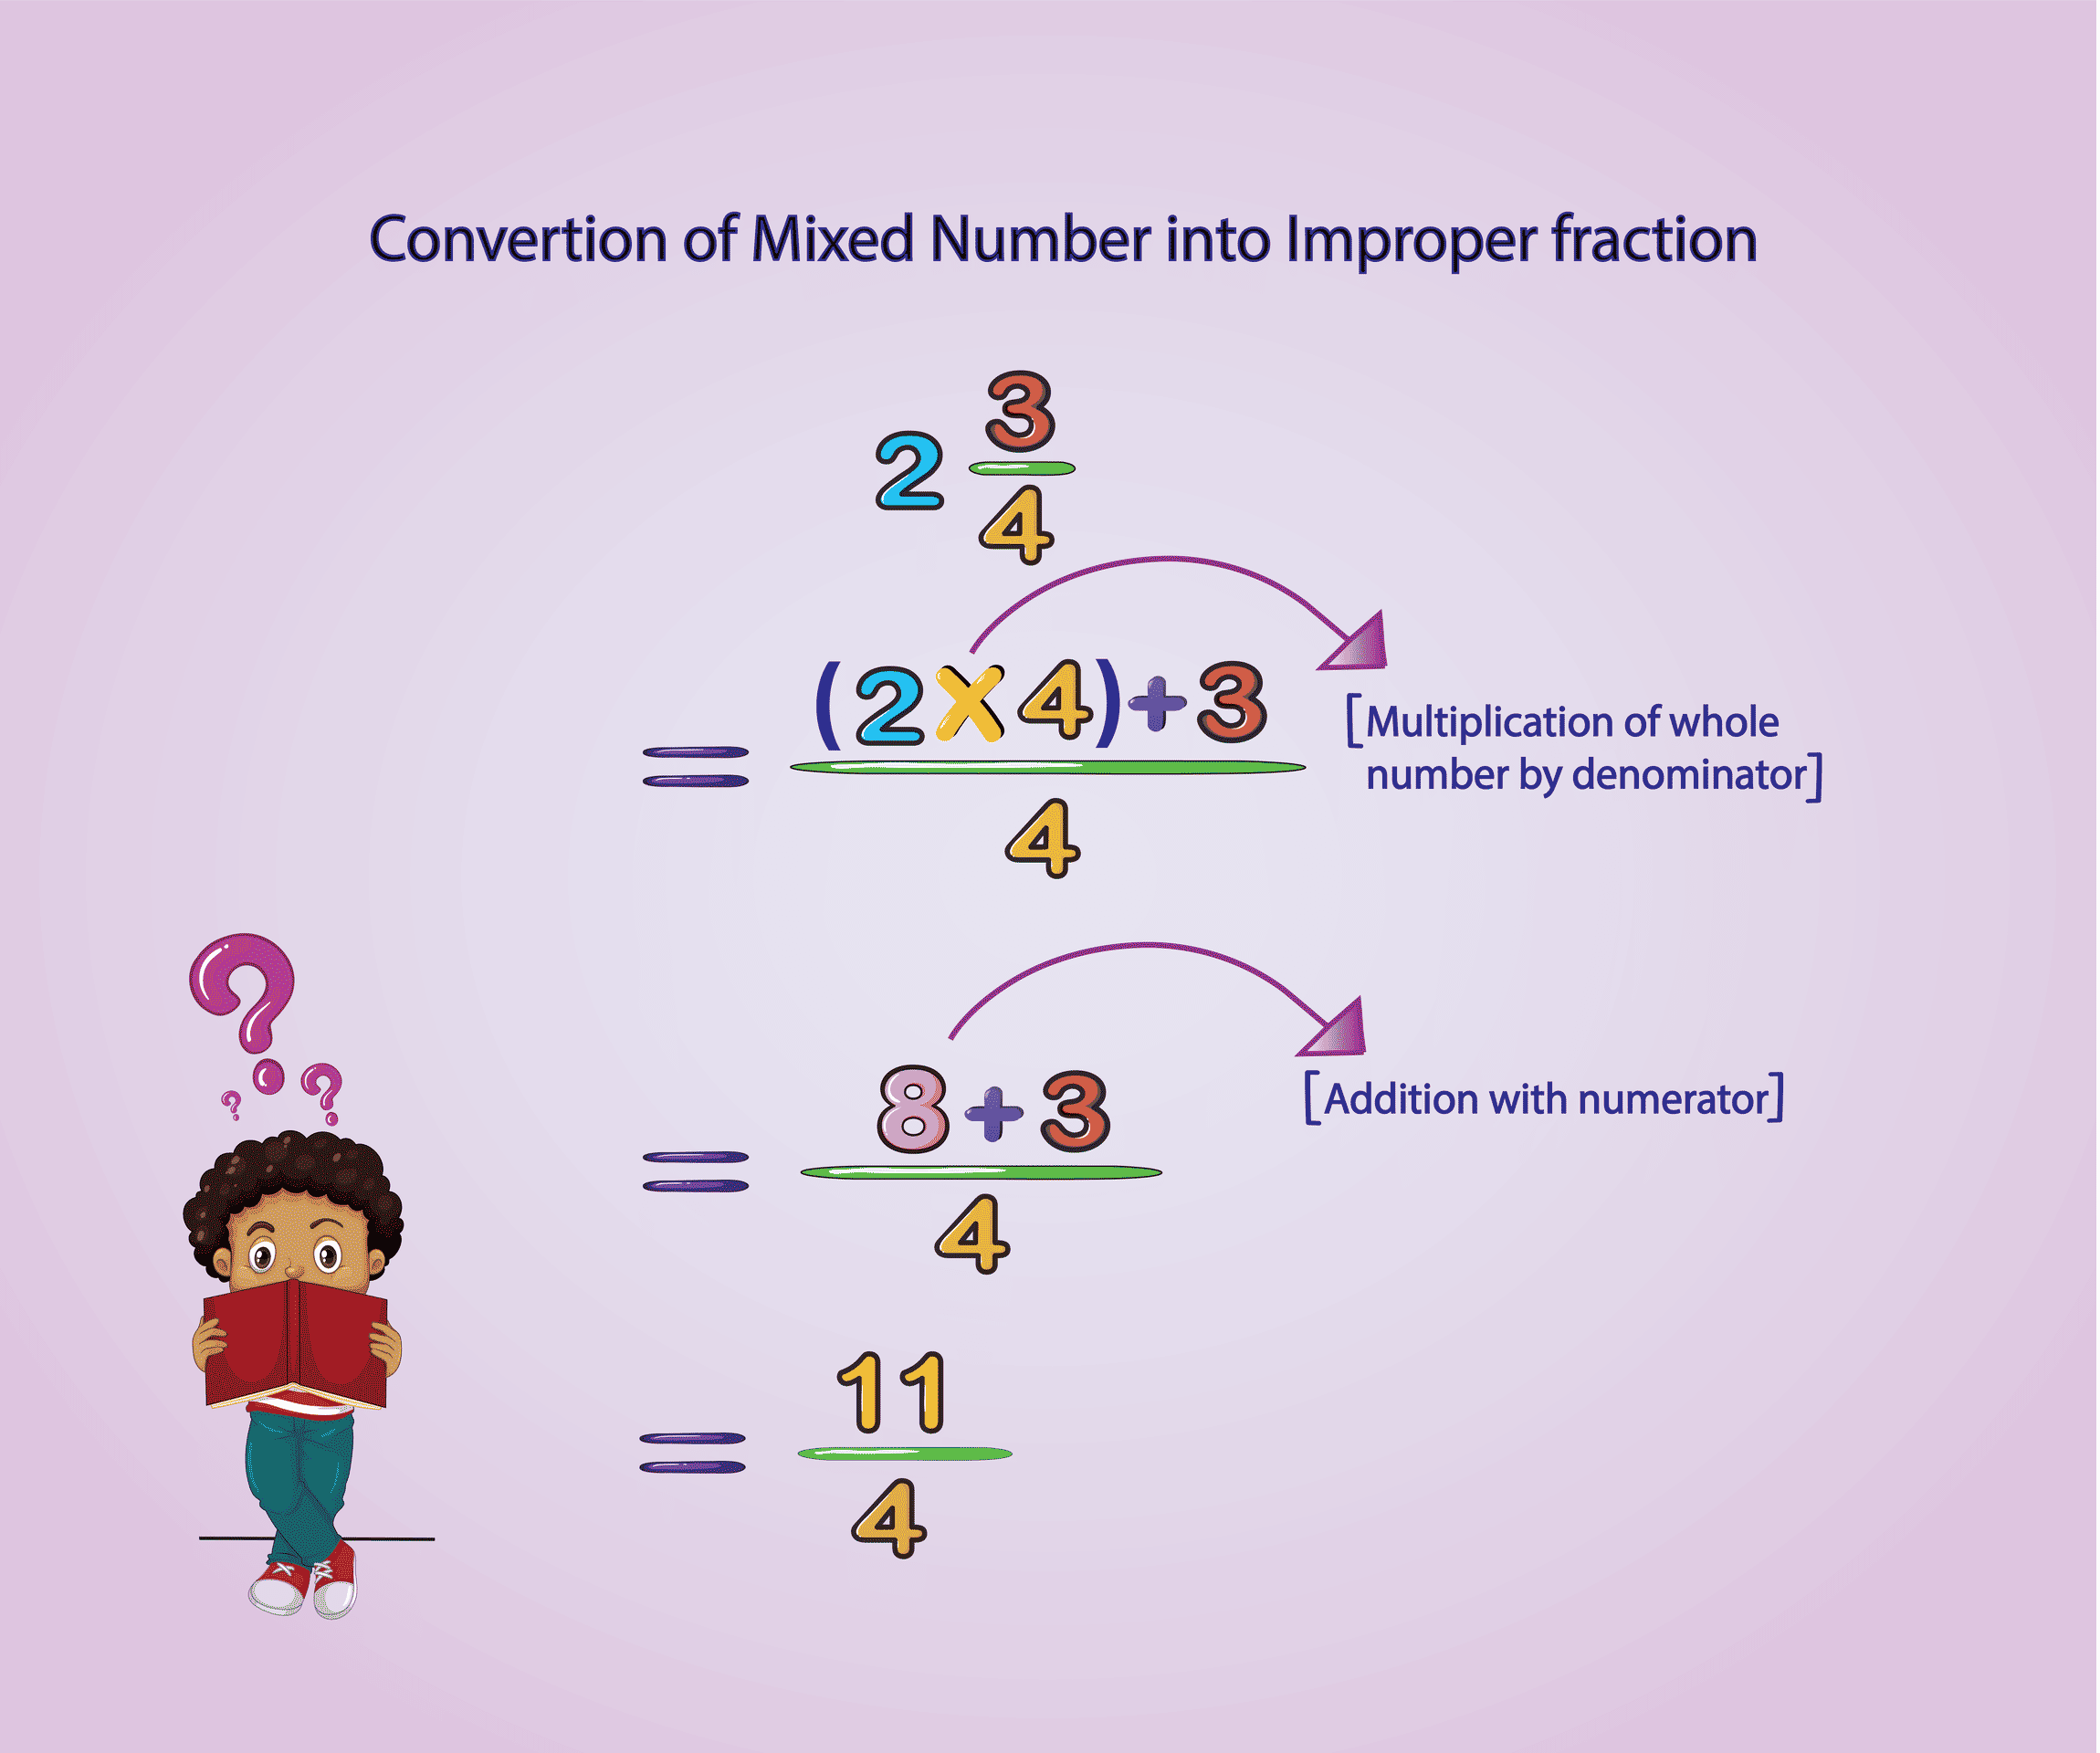 Converting Mixed Number into Improper Fraction